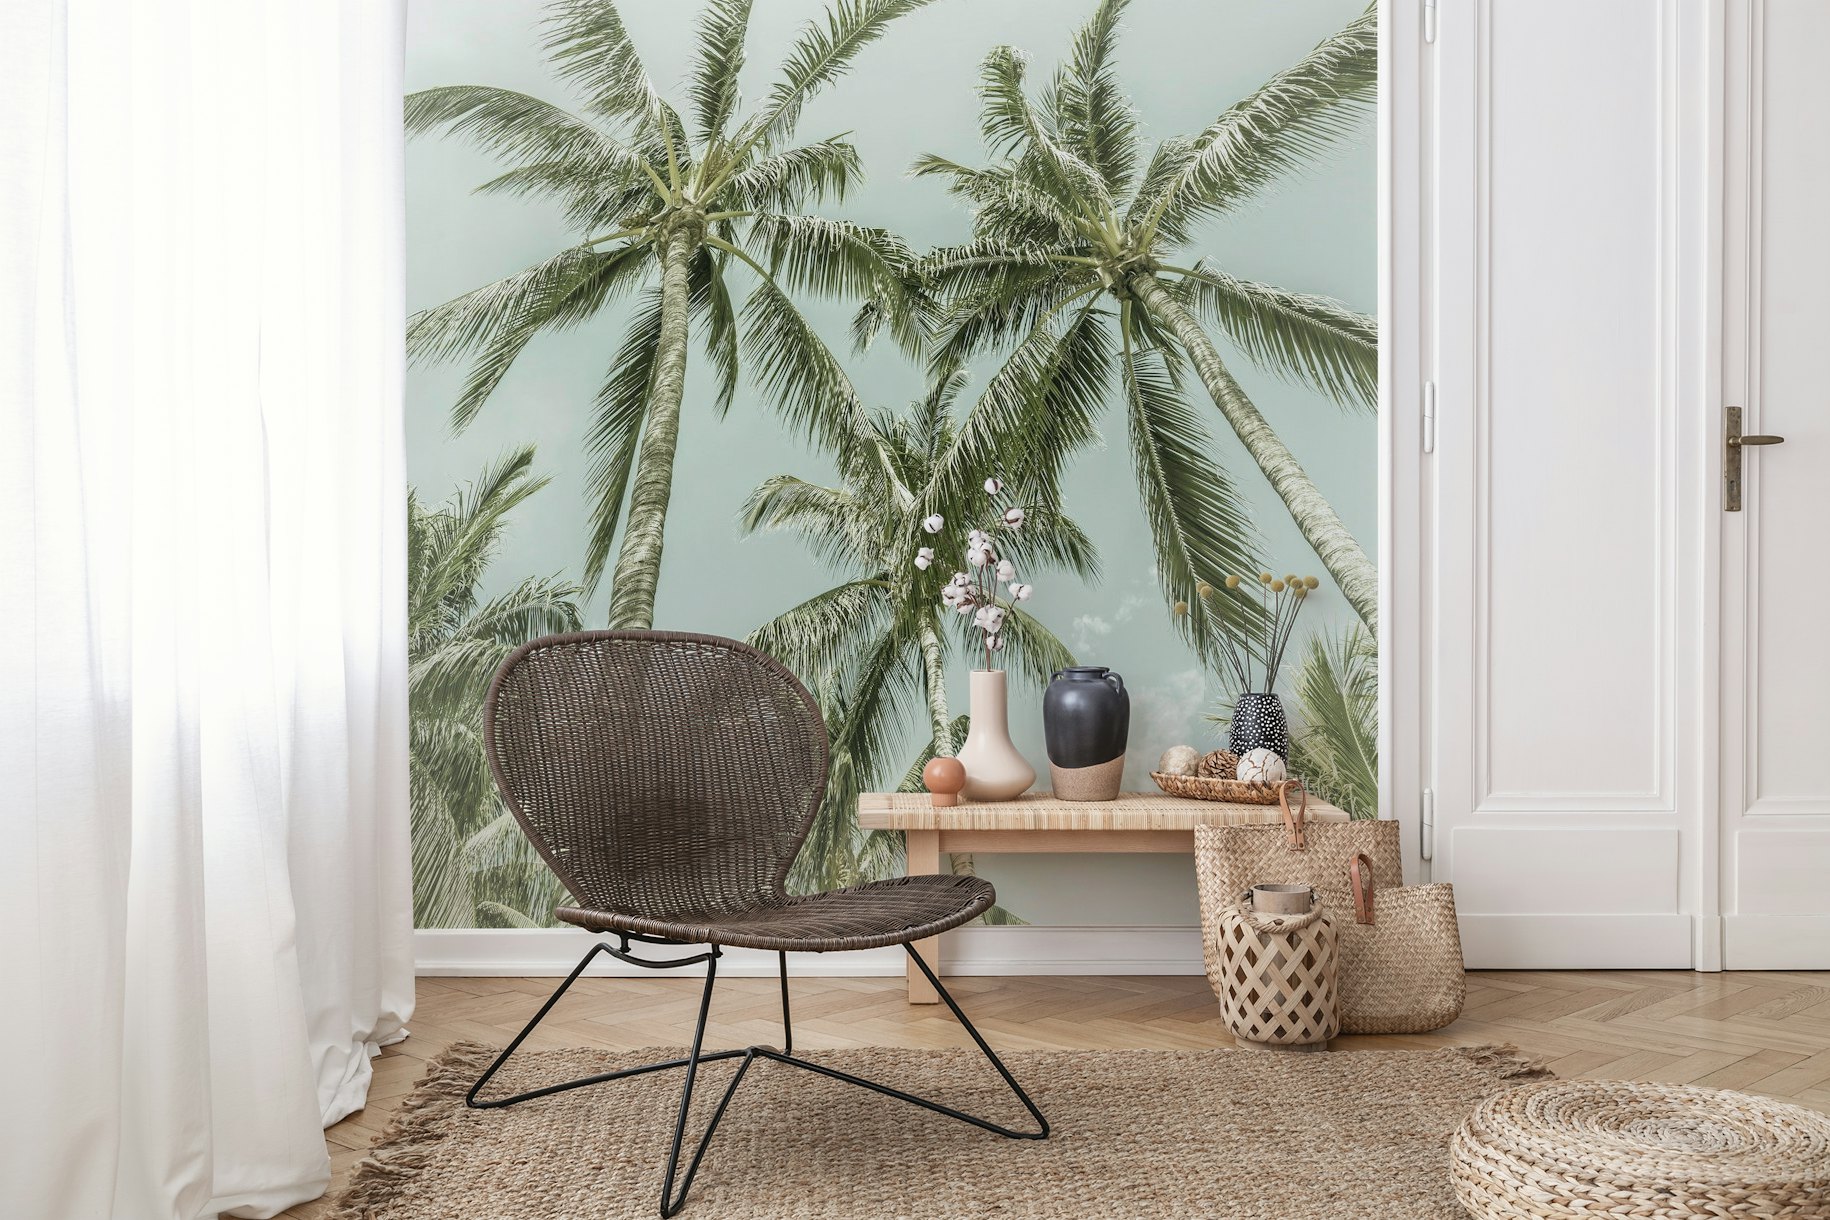 Lovely Vintage Palm Trees wallpaper